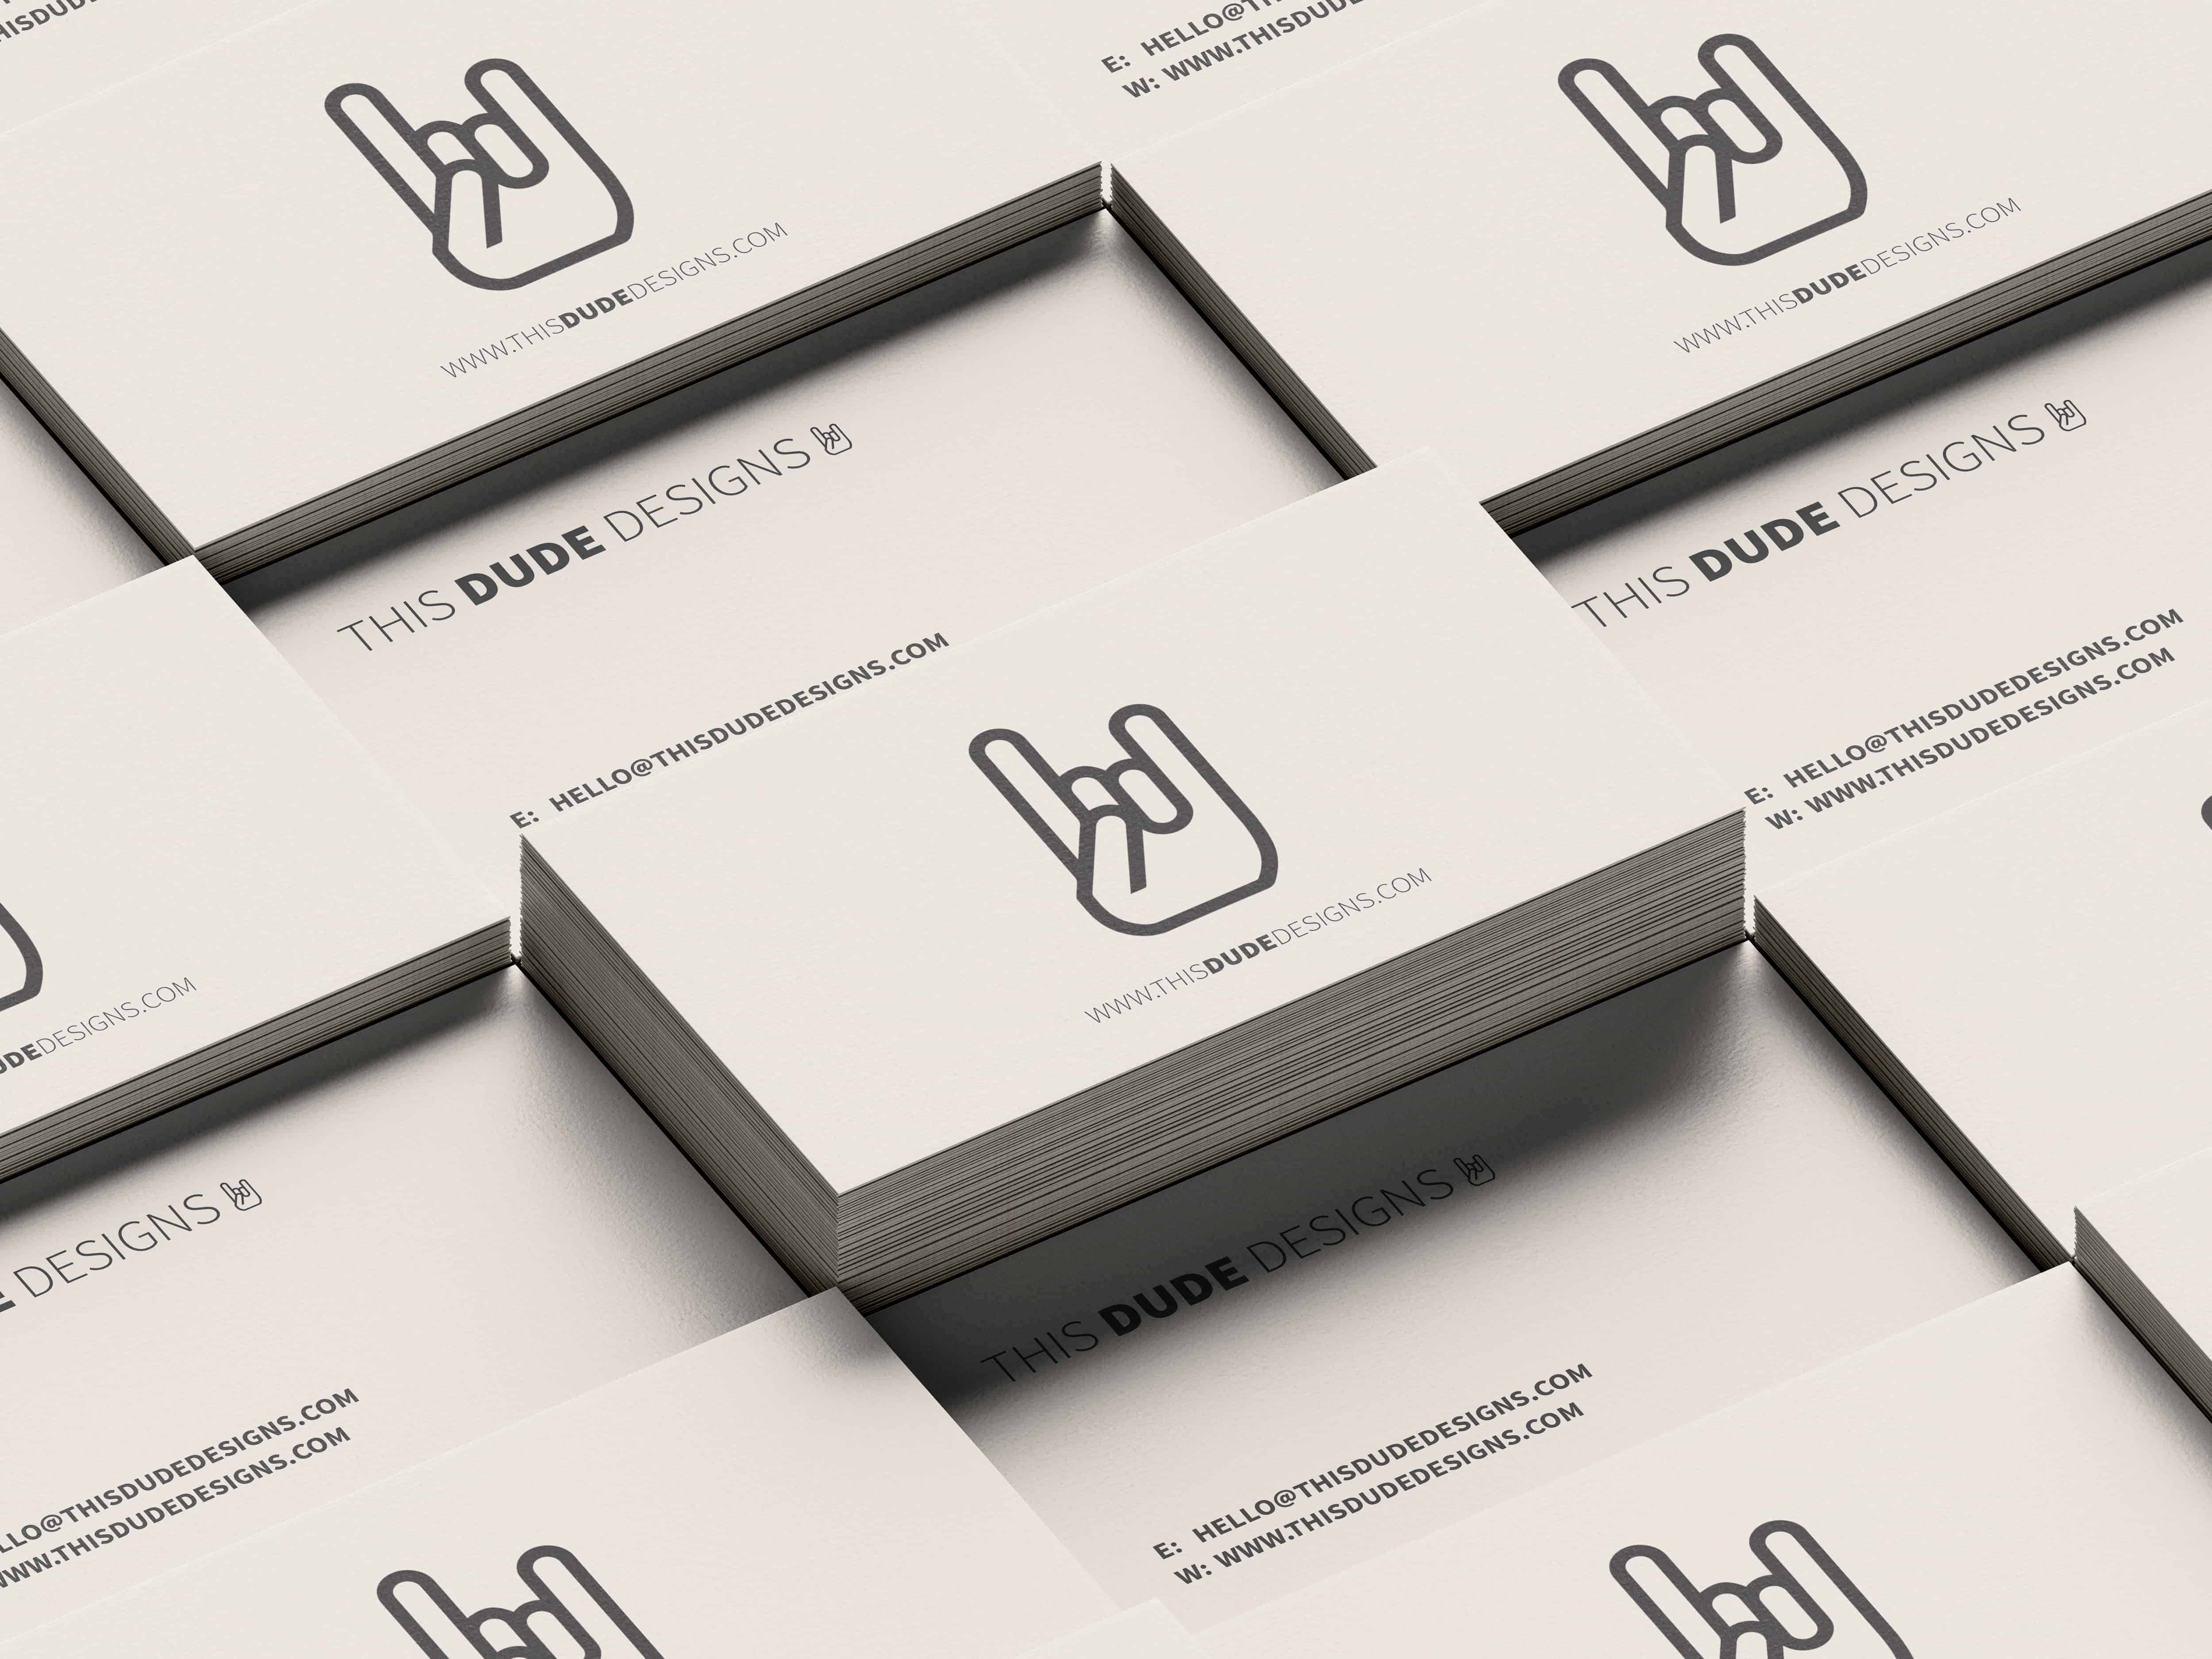 Business Cards by This Dude Designs